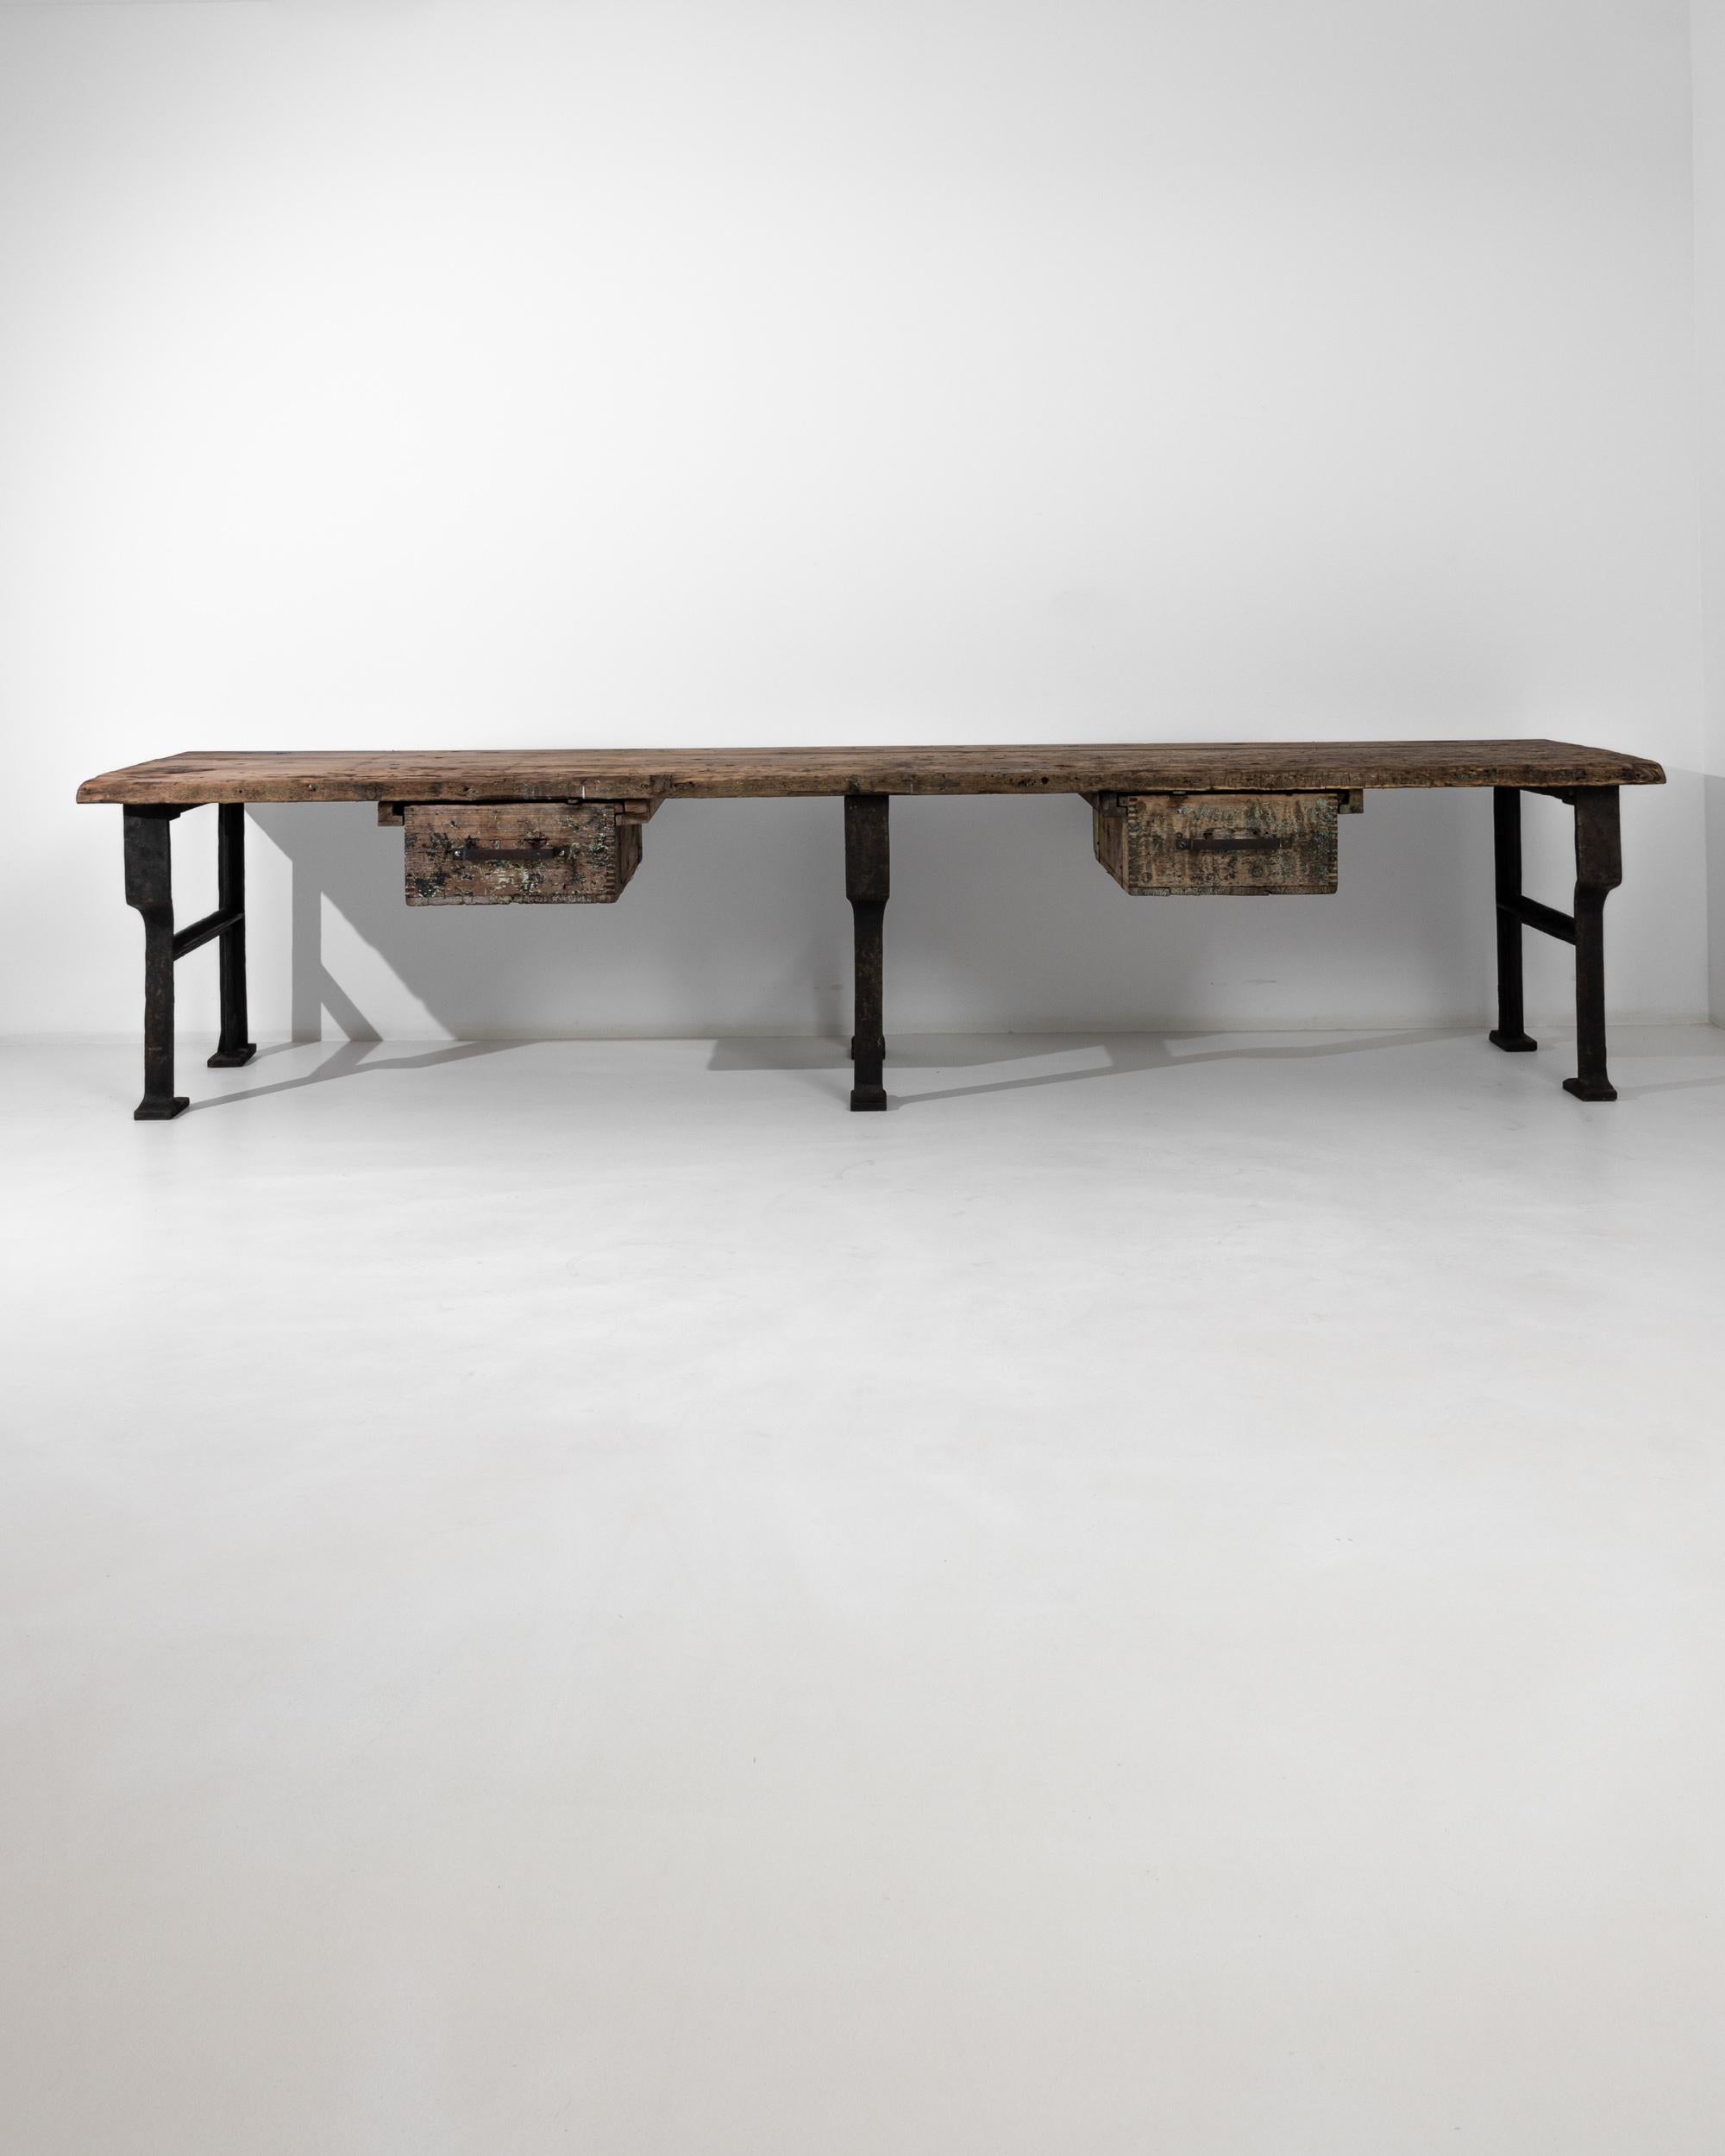 This work table built in Czechia circa 1950 is divided in two identical sections equipped with deep wooden drawers: their coarse metal handles mirror the iron A-shaped legs that support the table at the center and from the sides. The unrefined